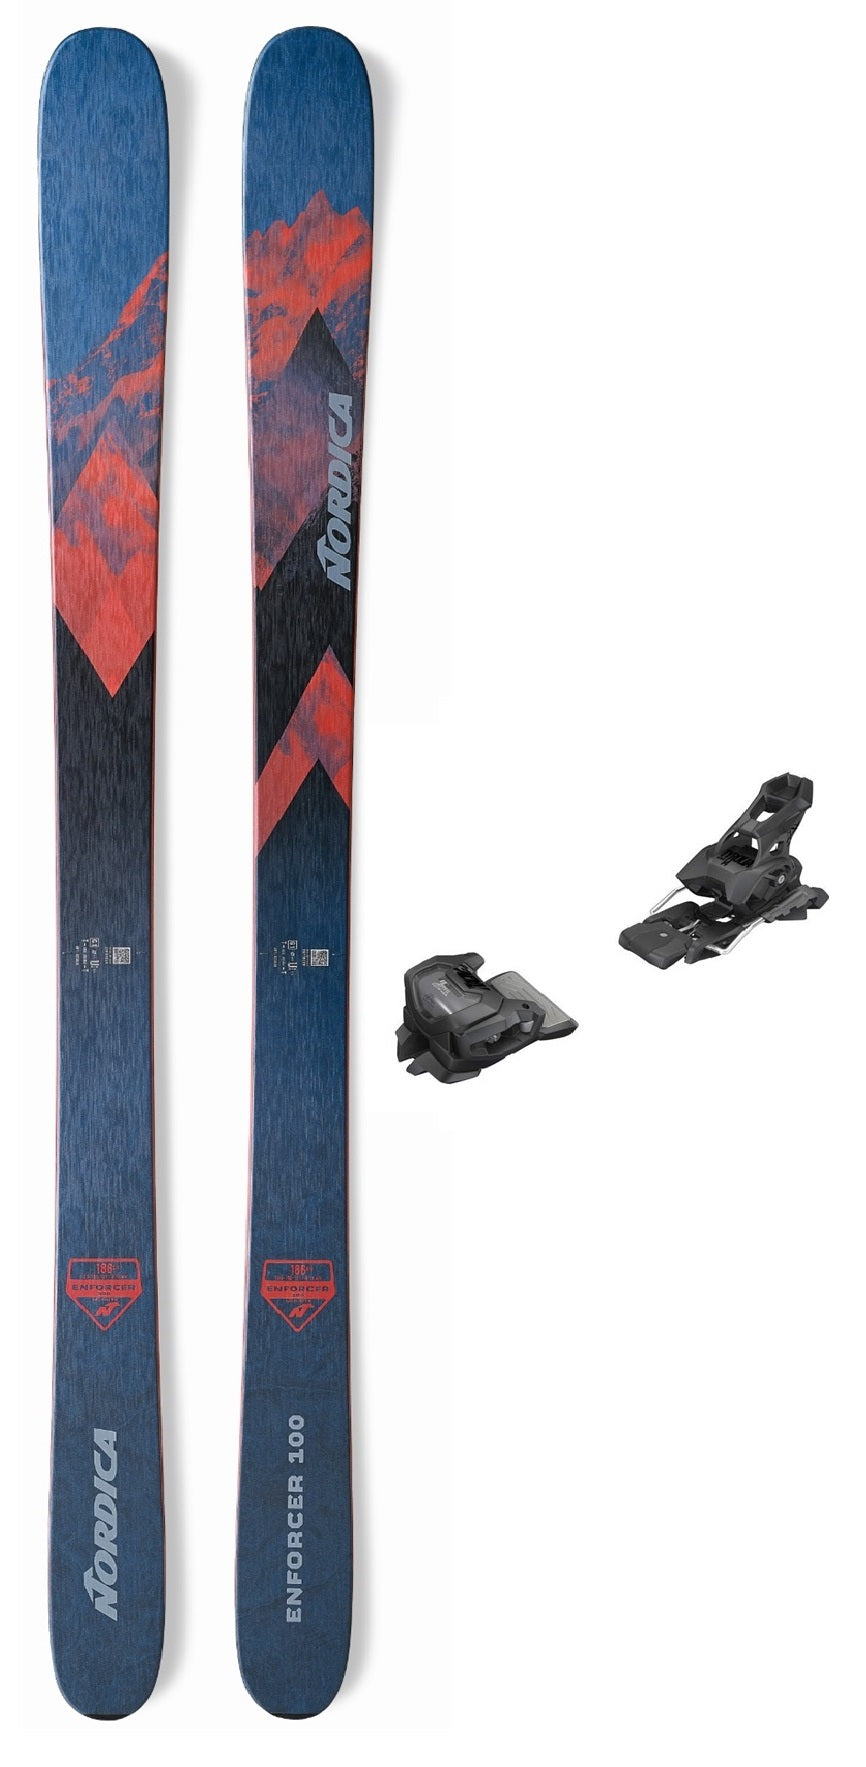 Nordica Enforcer 100 Snow Skis with Attack 14 Bindings